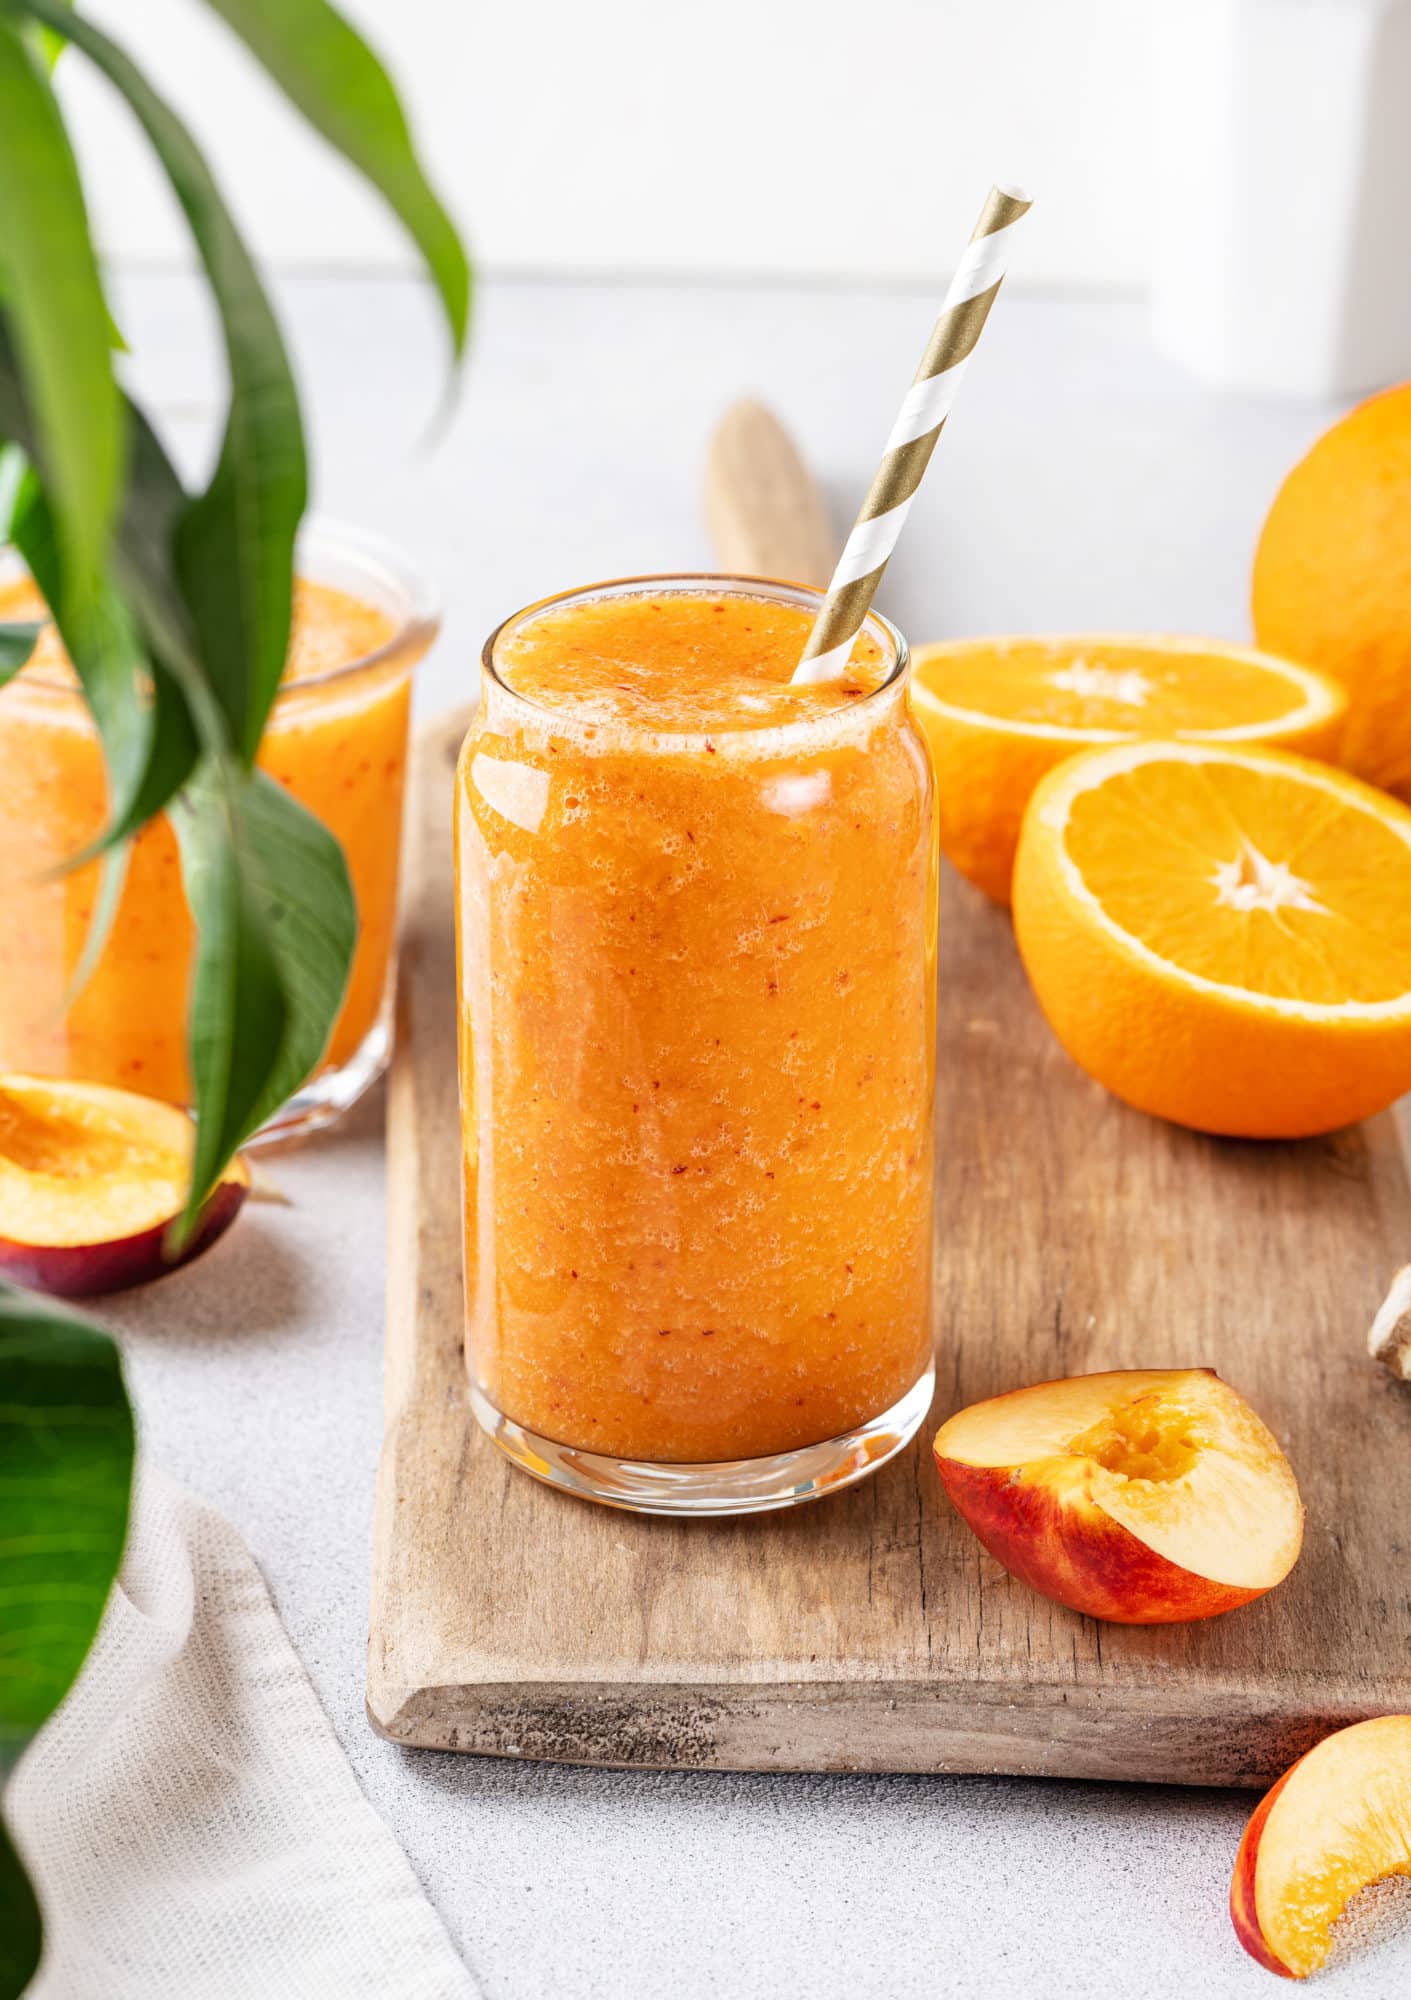 apricot-smoothie-carrot-juice-in-clear-glass-on-wooden-board-sliced-orange-brown-white-straw-green-leaves